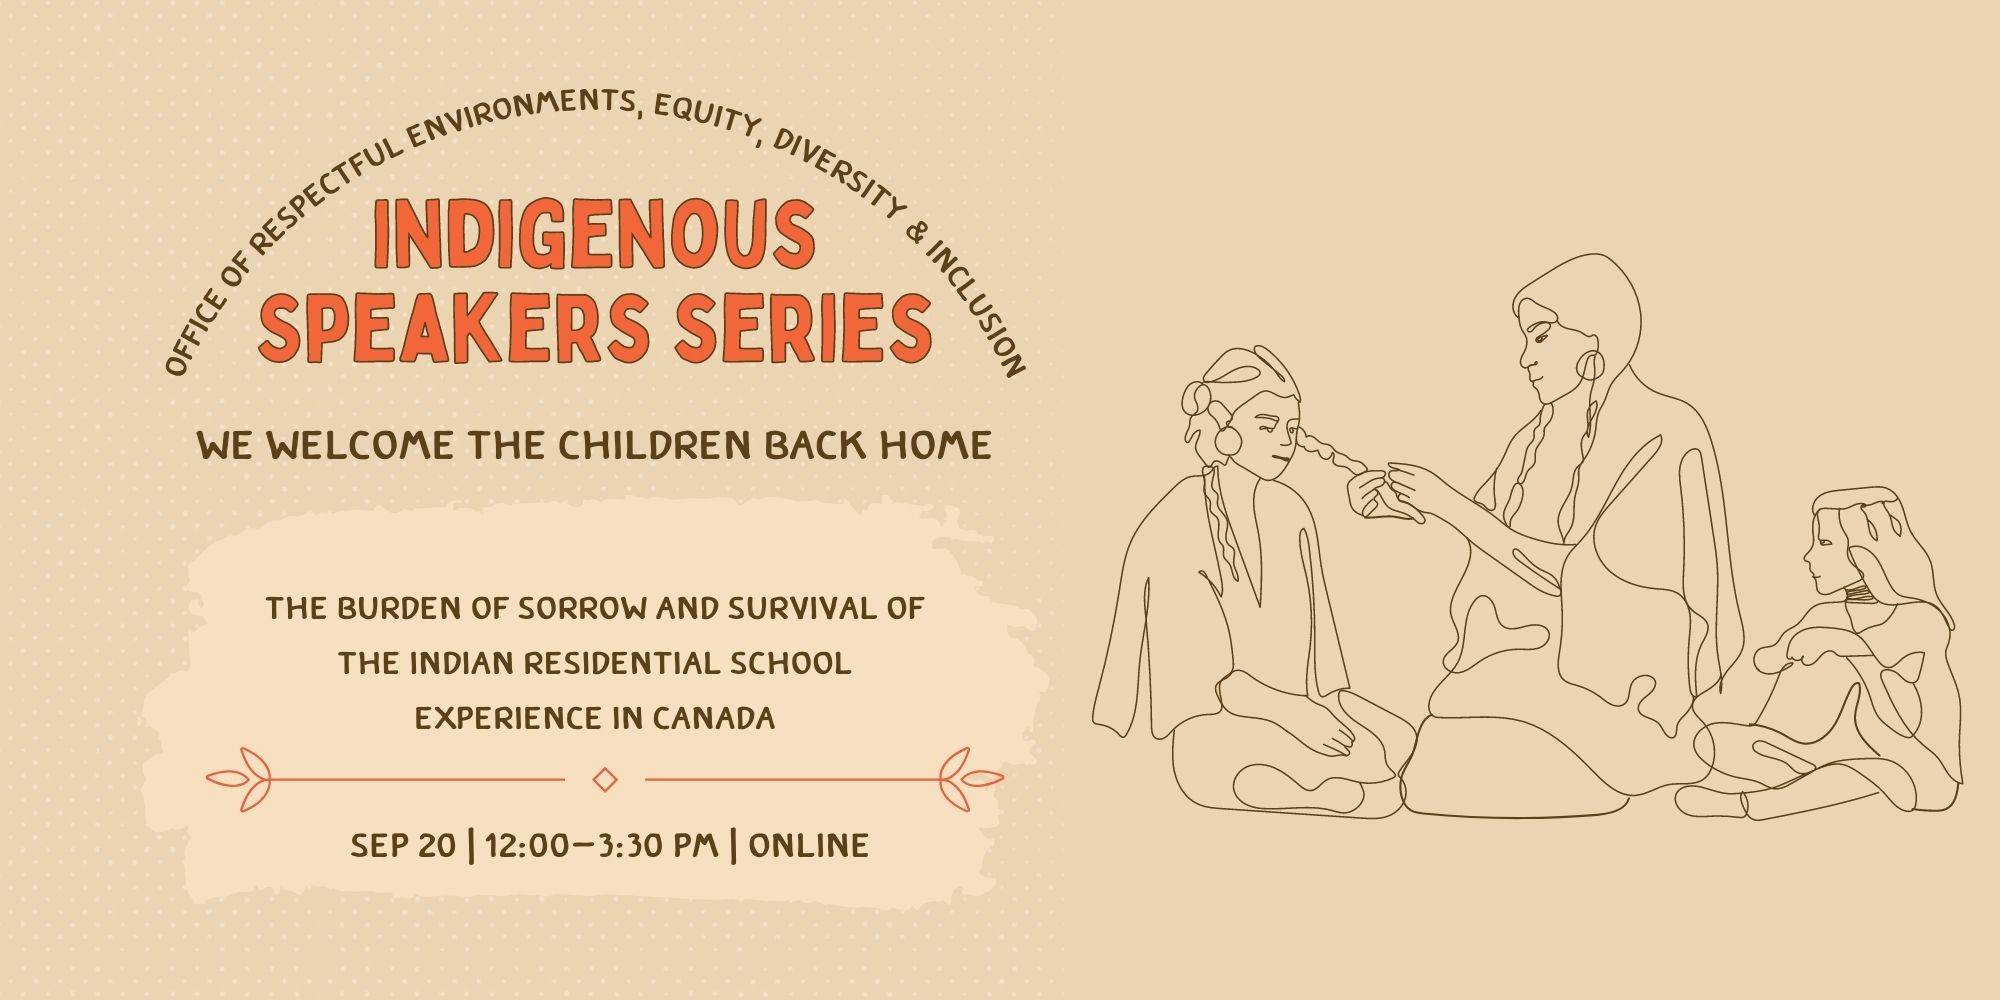 We Welcome The Children Back Home: The Burden of Sorrow and Survival of the Indian Residential School Experience in Canada